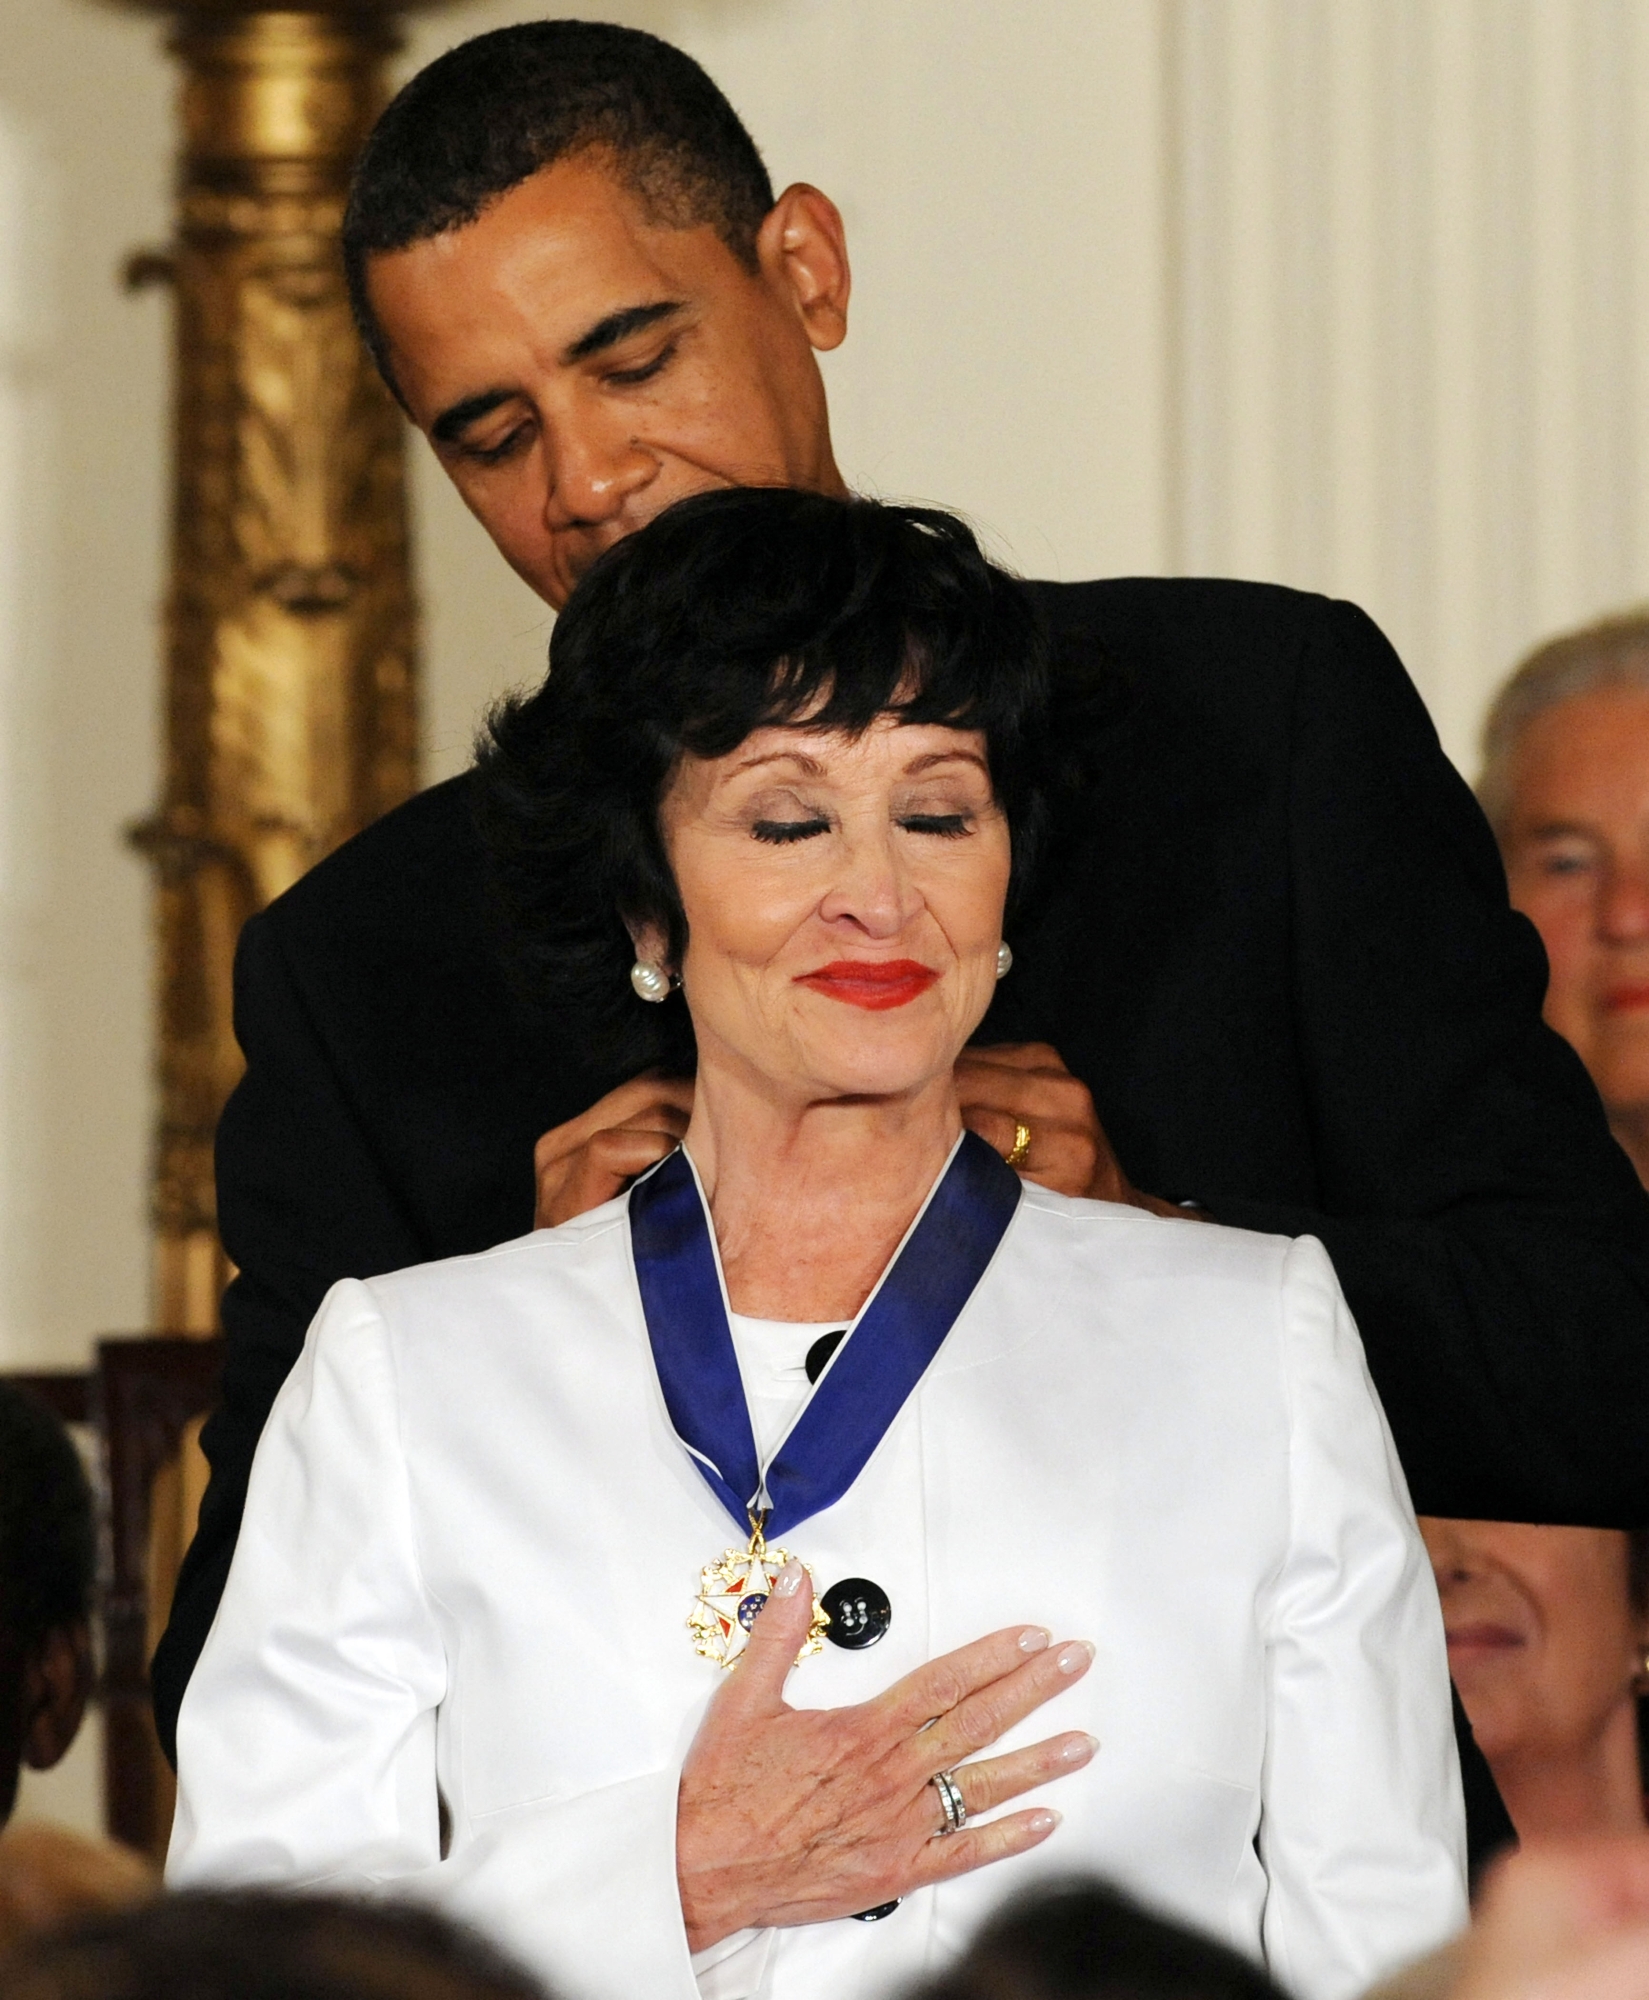 (FILES) US President Barack Obama presents the Presidential Medal of Freedom to actress, singer and dancer Chita Rivera during a ceremony in the East Room at the White House on August 12, 2009. Chita Rivera -- a singer, dancer and actress who lit up Broadway stages over six decades in such shows as "West Side Story" and "Chicago" as one of the foremost entertainers of her generation -- died at the age of 91 on January 30, 2024, her publicist said. (Photo by JEWEL SAMAD / AFP)